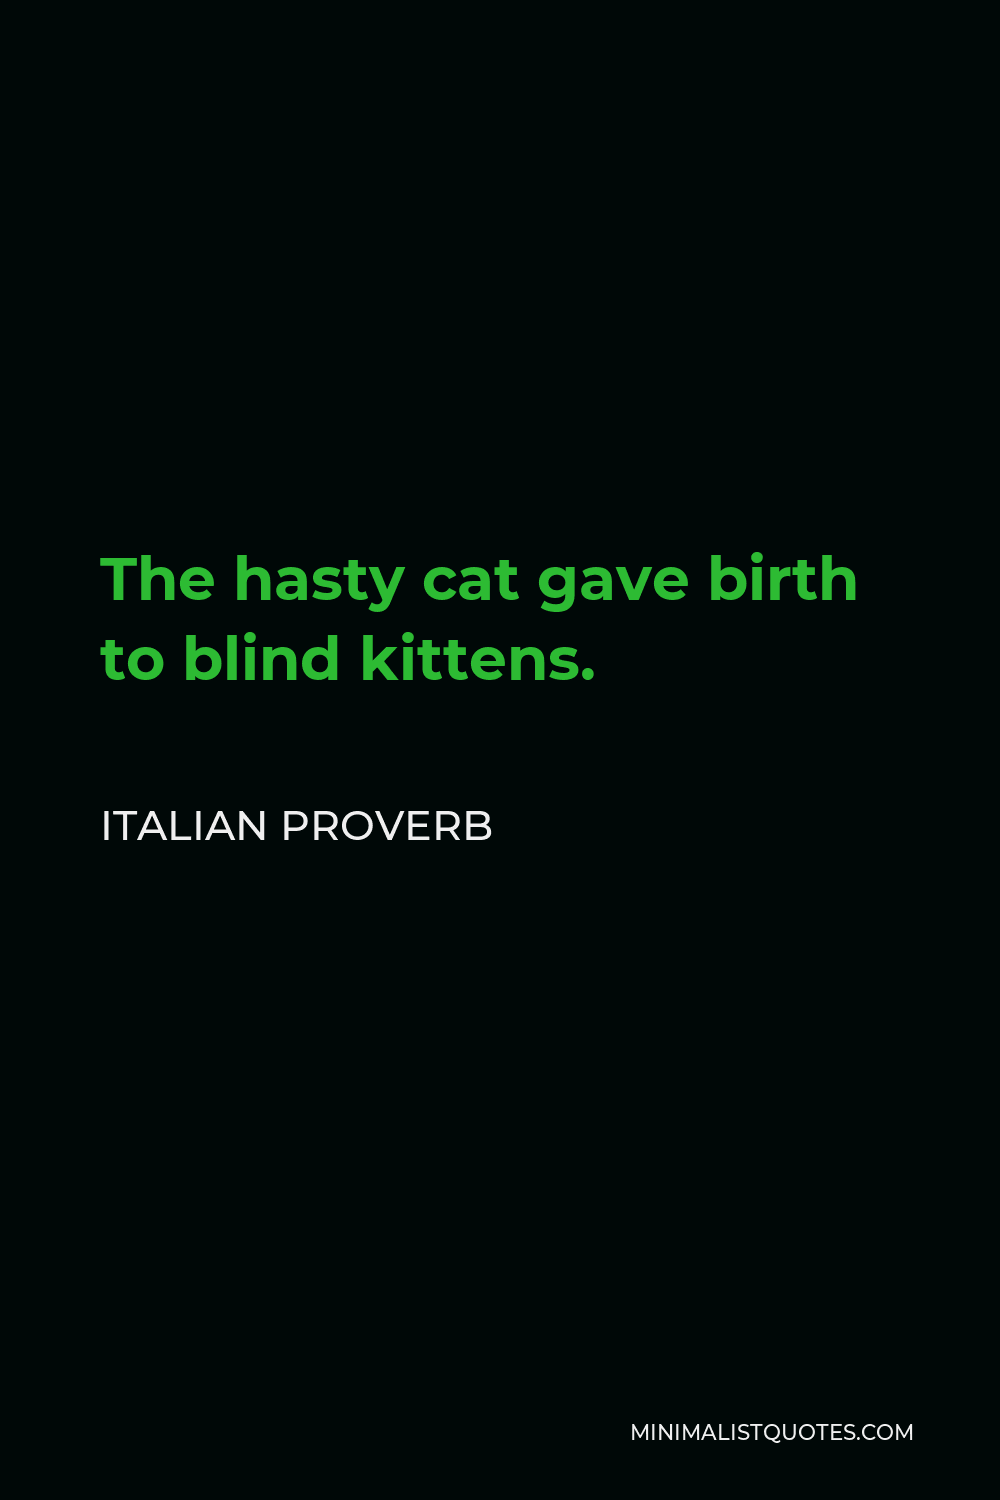 Italian Proverb Quote - The hasty cat gave birth to blind kittens.